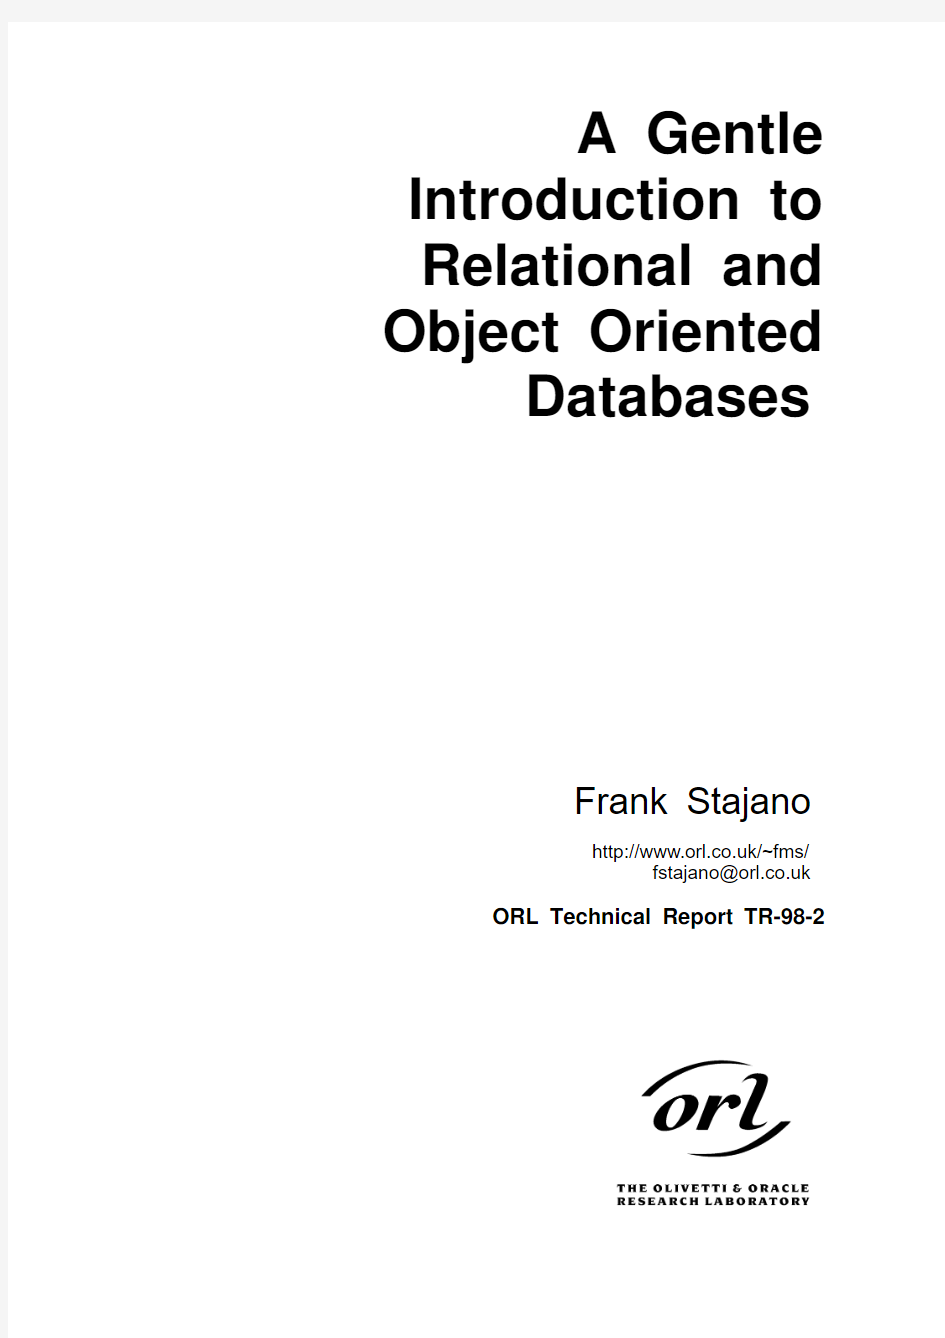 Introduction to Relational and Object Oriented Databases